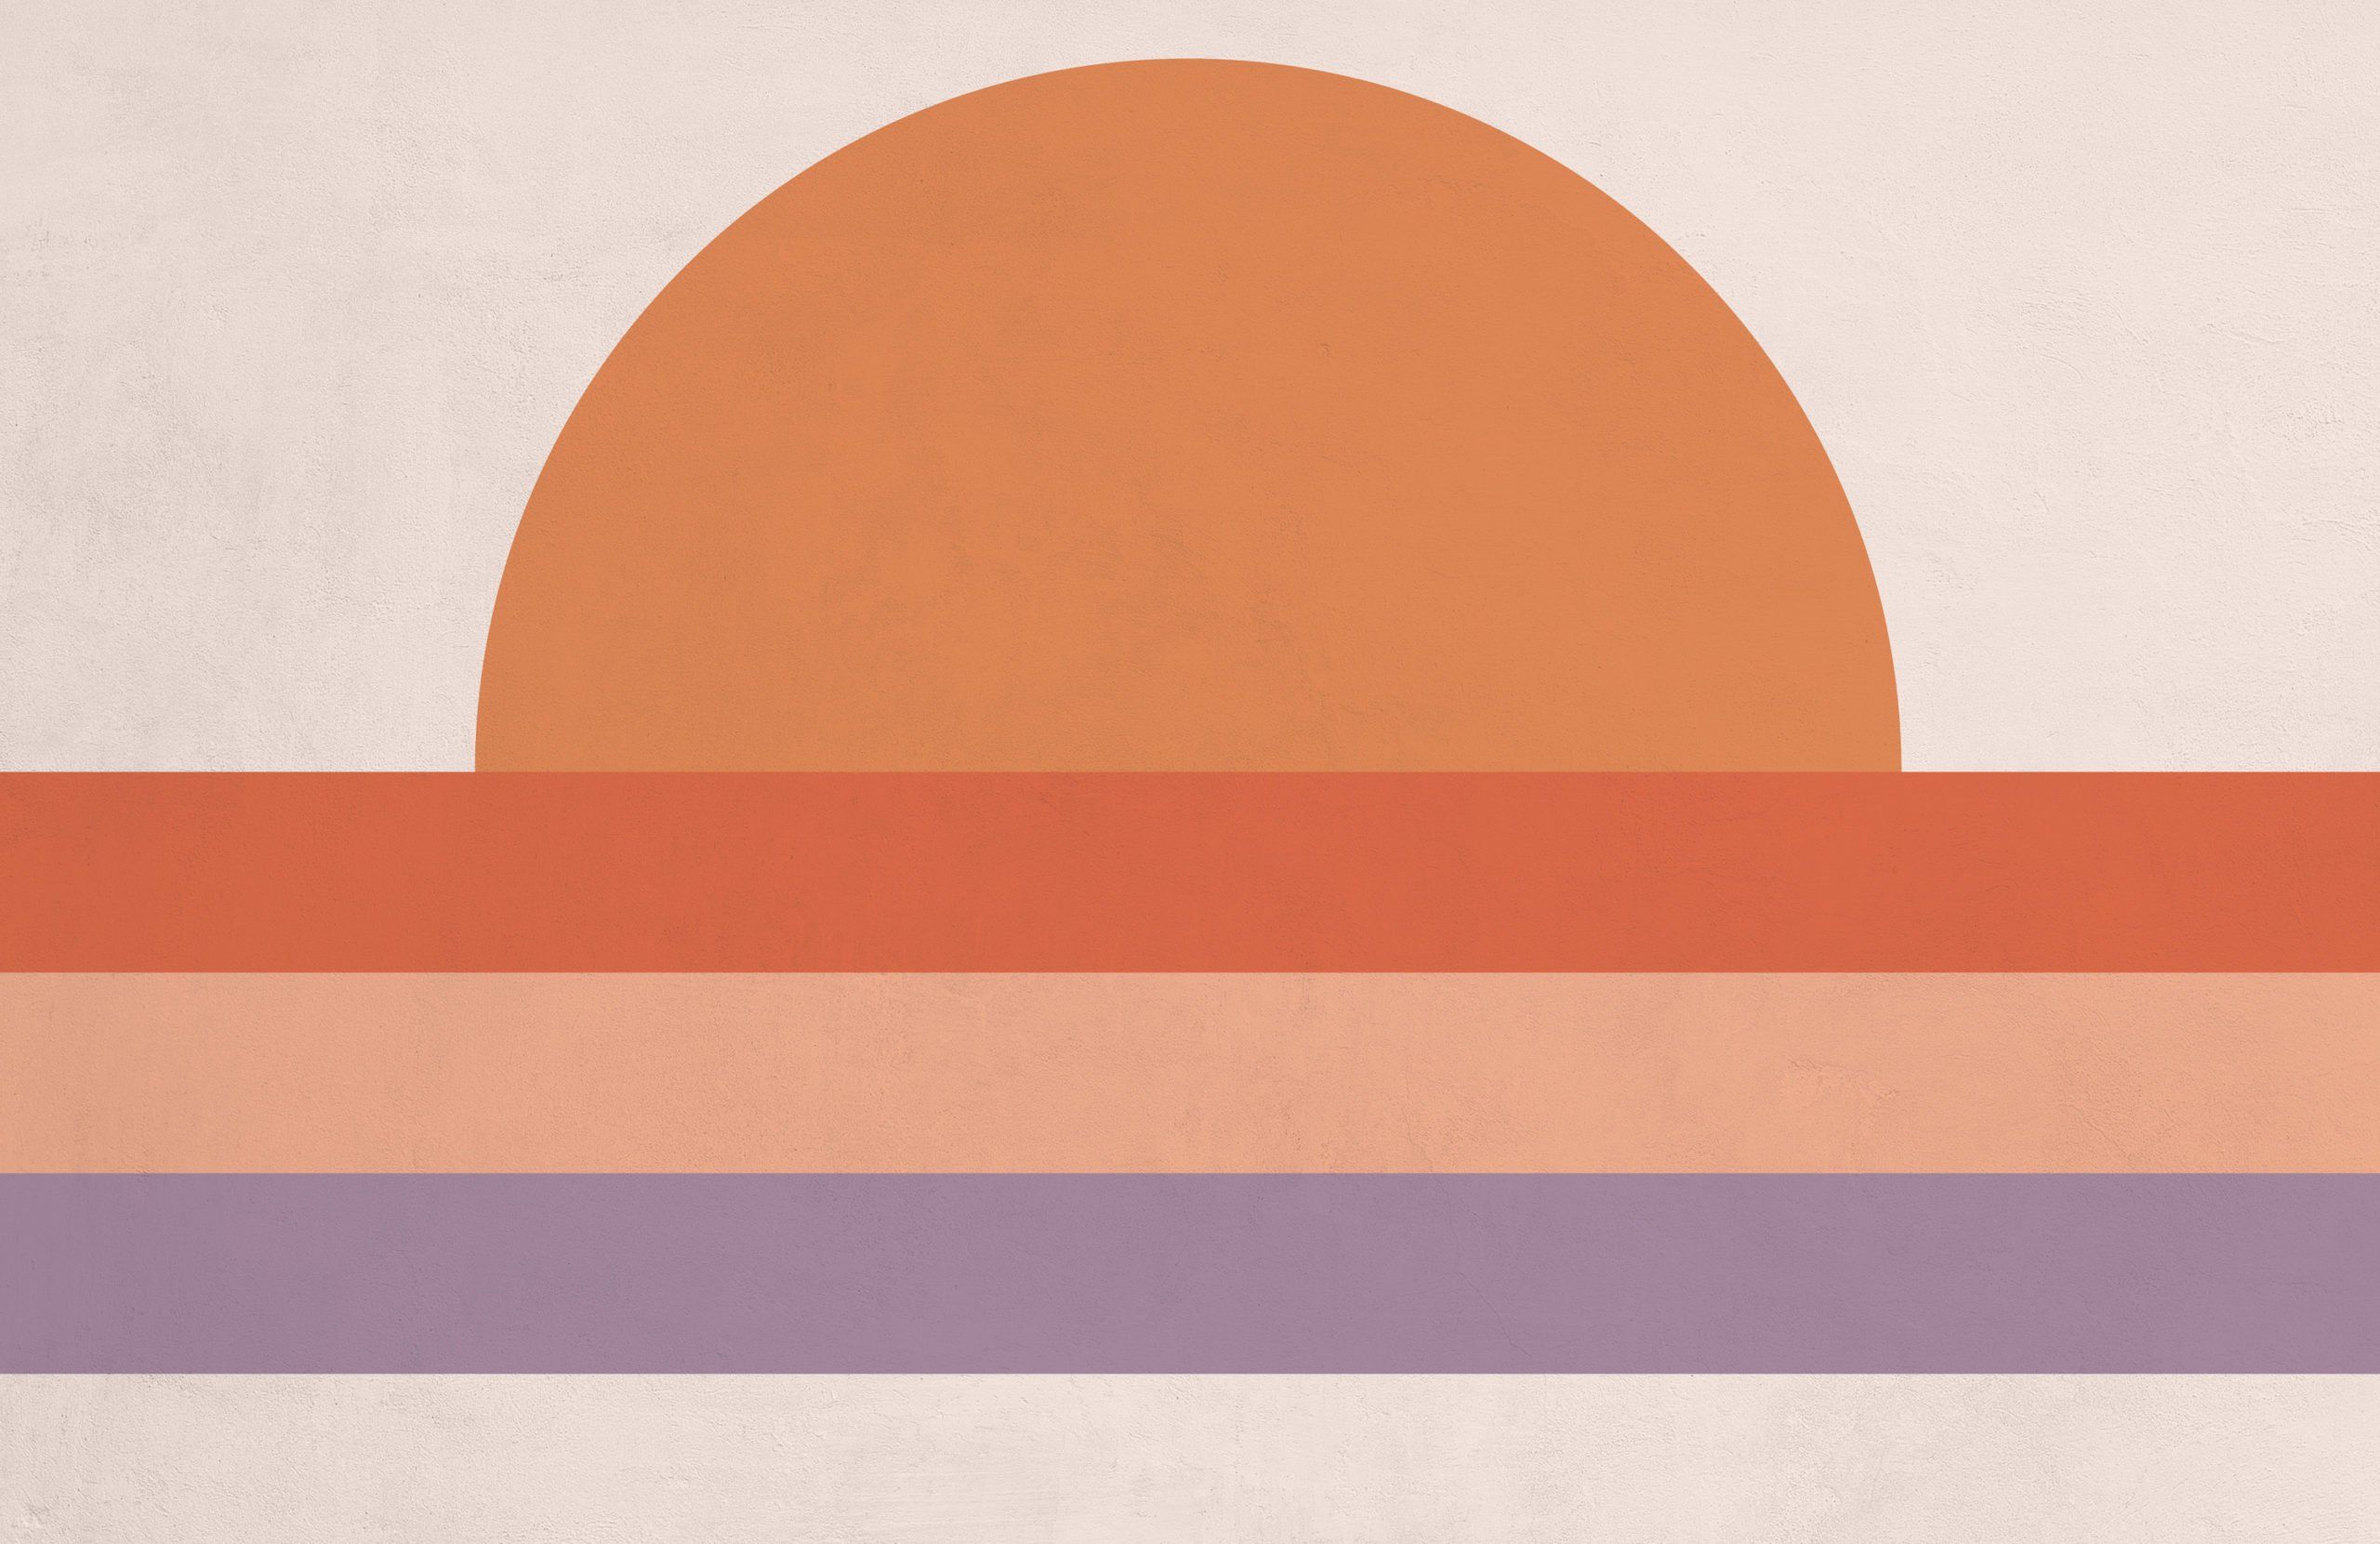 A graphic of a sun setting over three horizontal stripes, the top stripe being orange, the middle stripe being red, and the bottom stripe being purple. - 70s